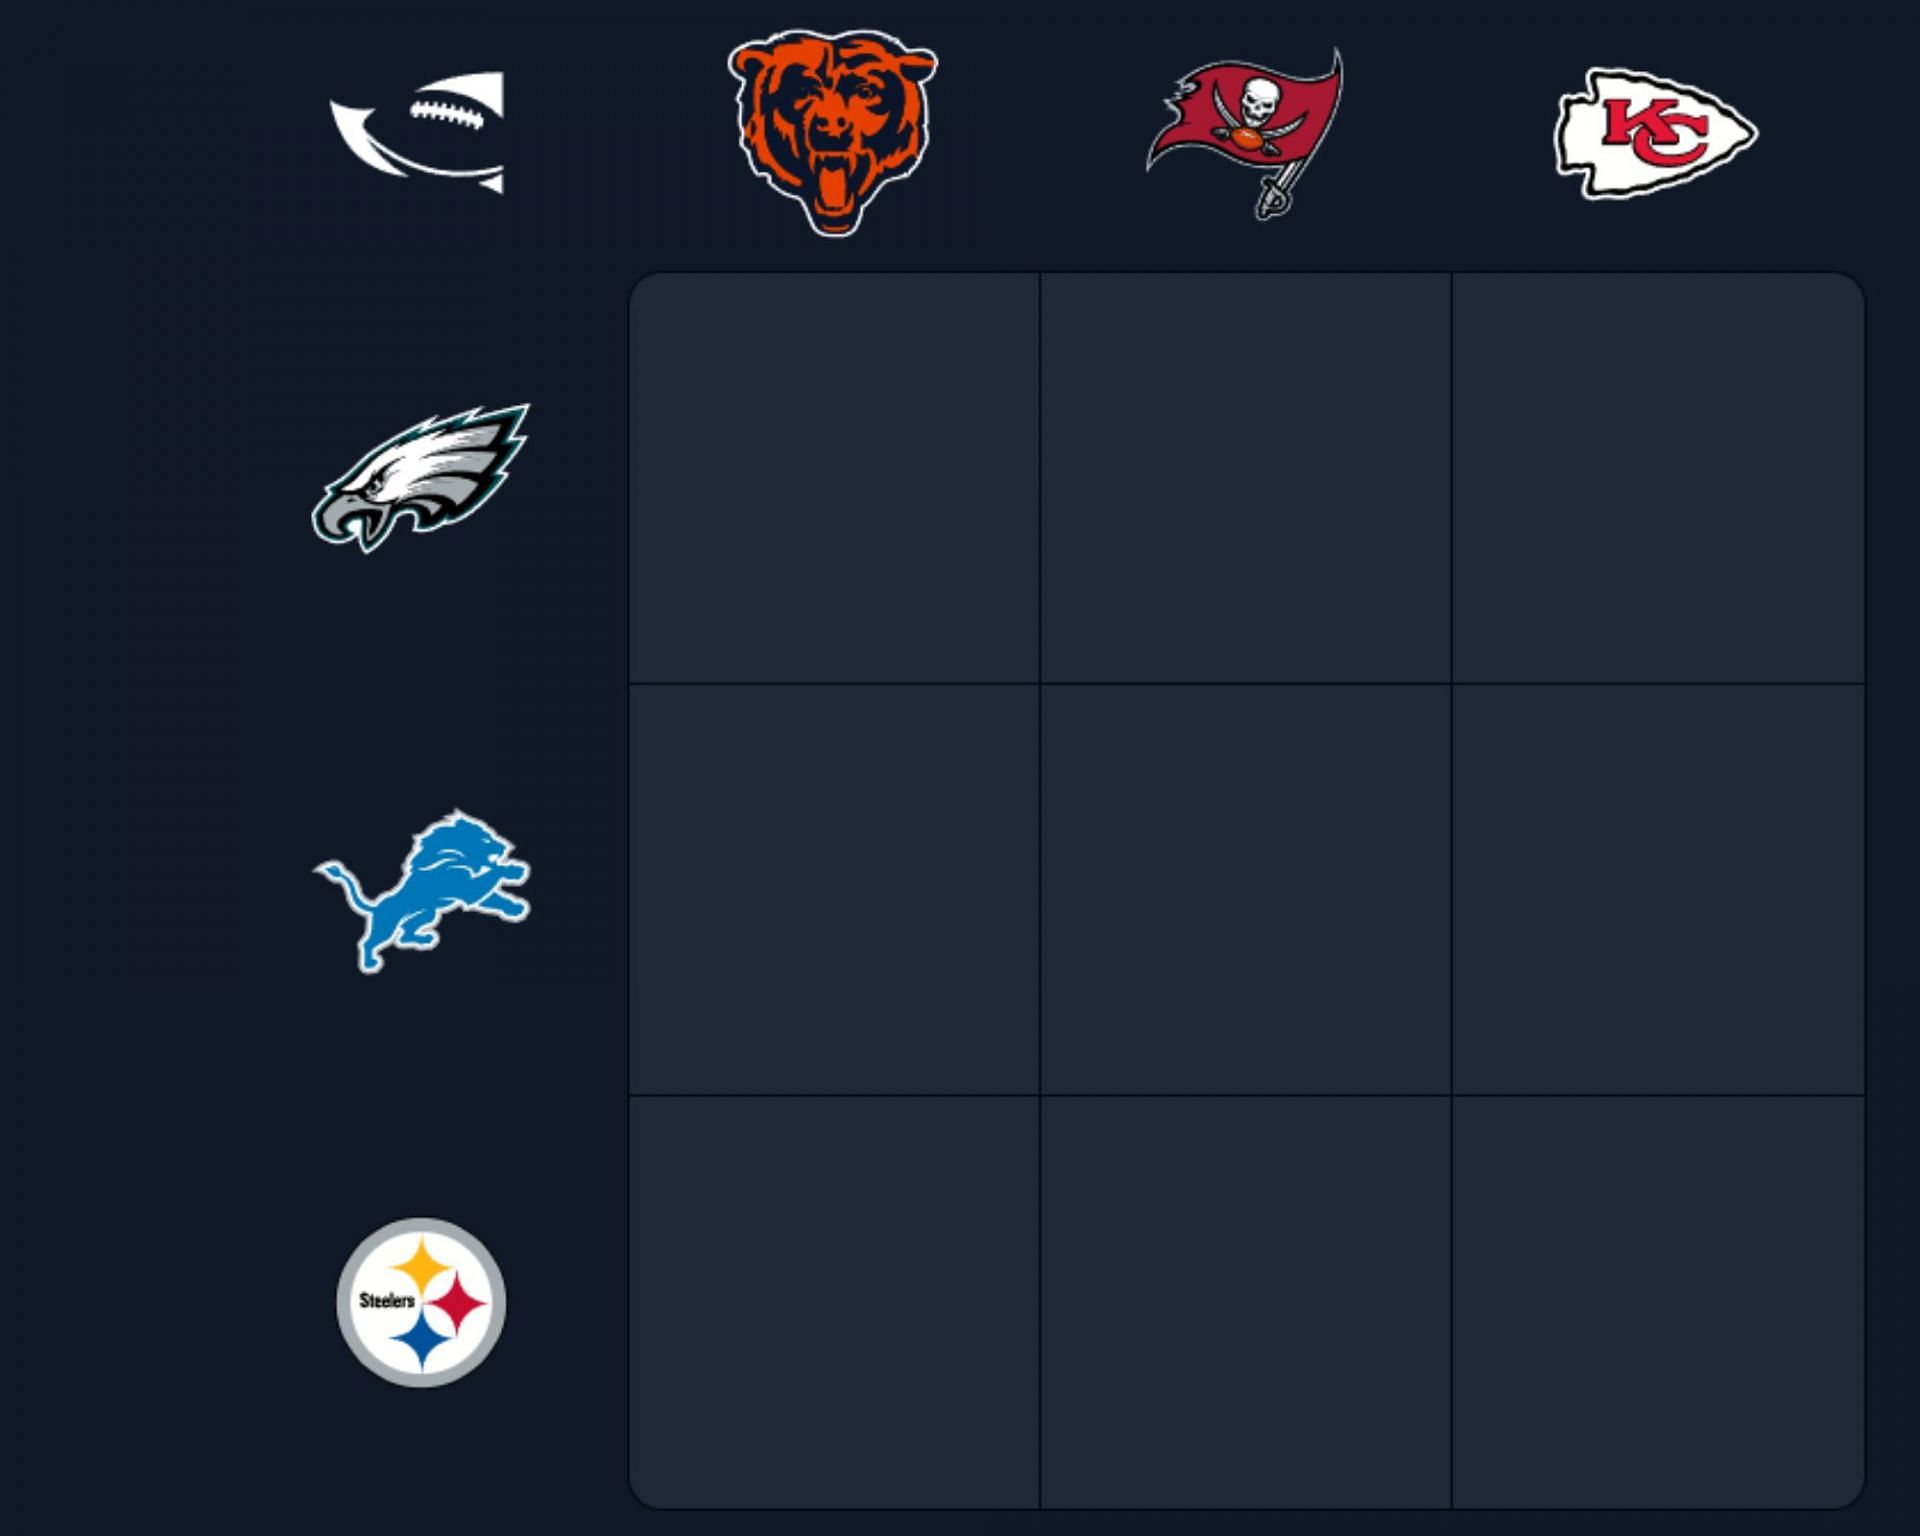 NFL Immaculate Grid for August 27